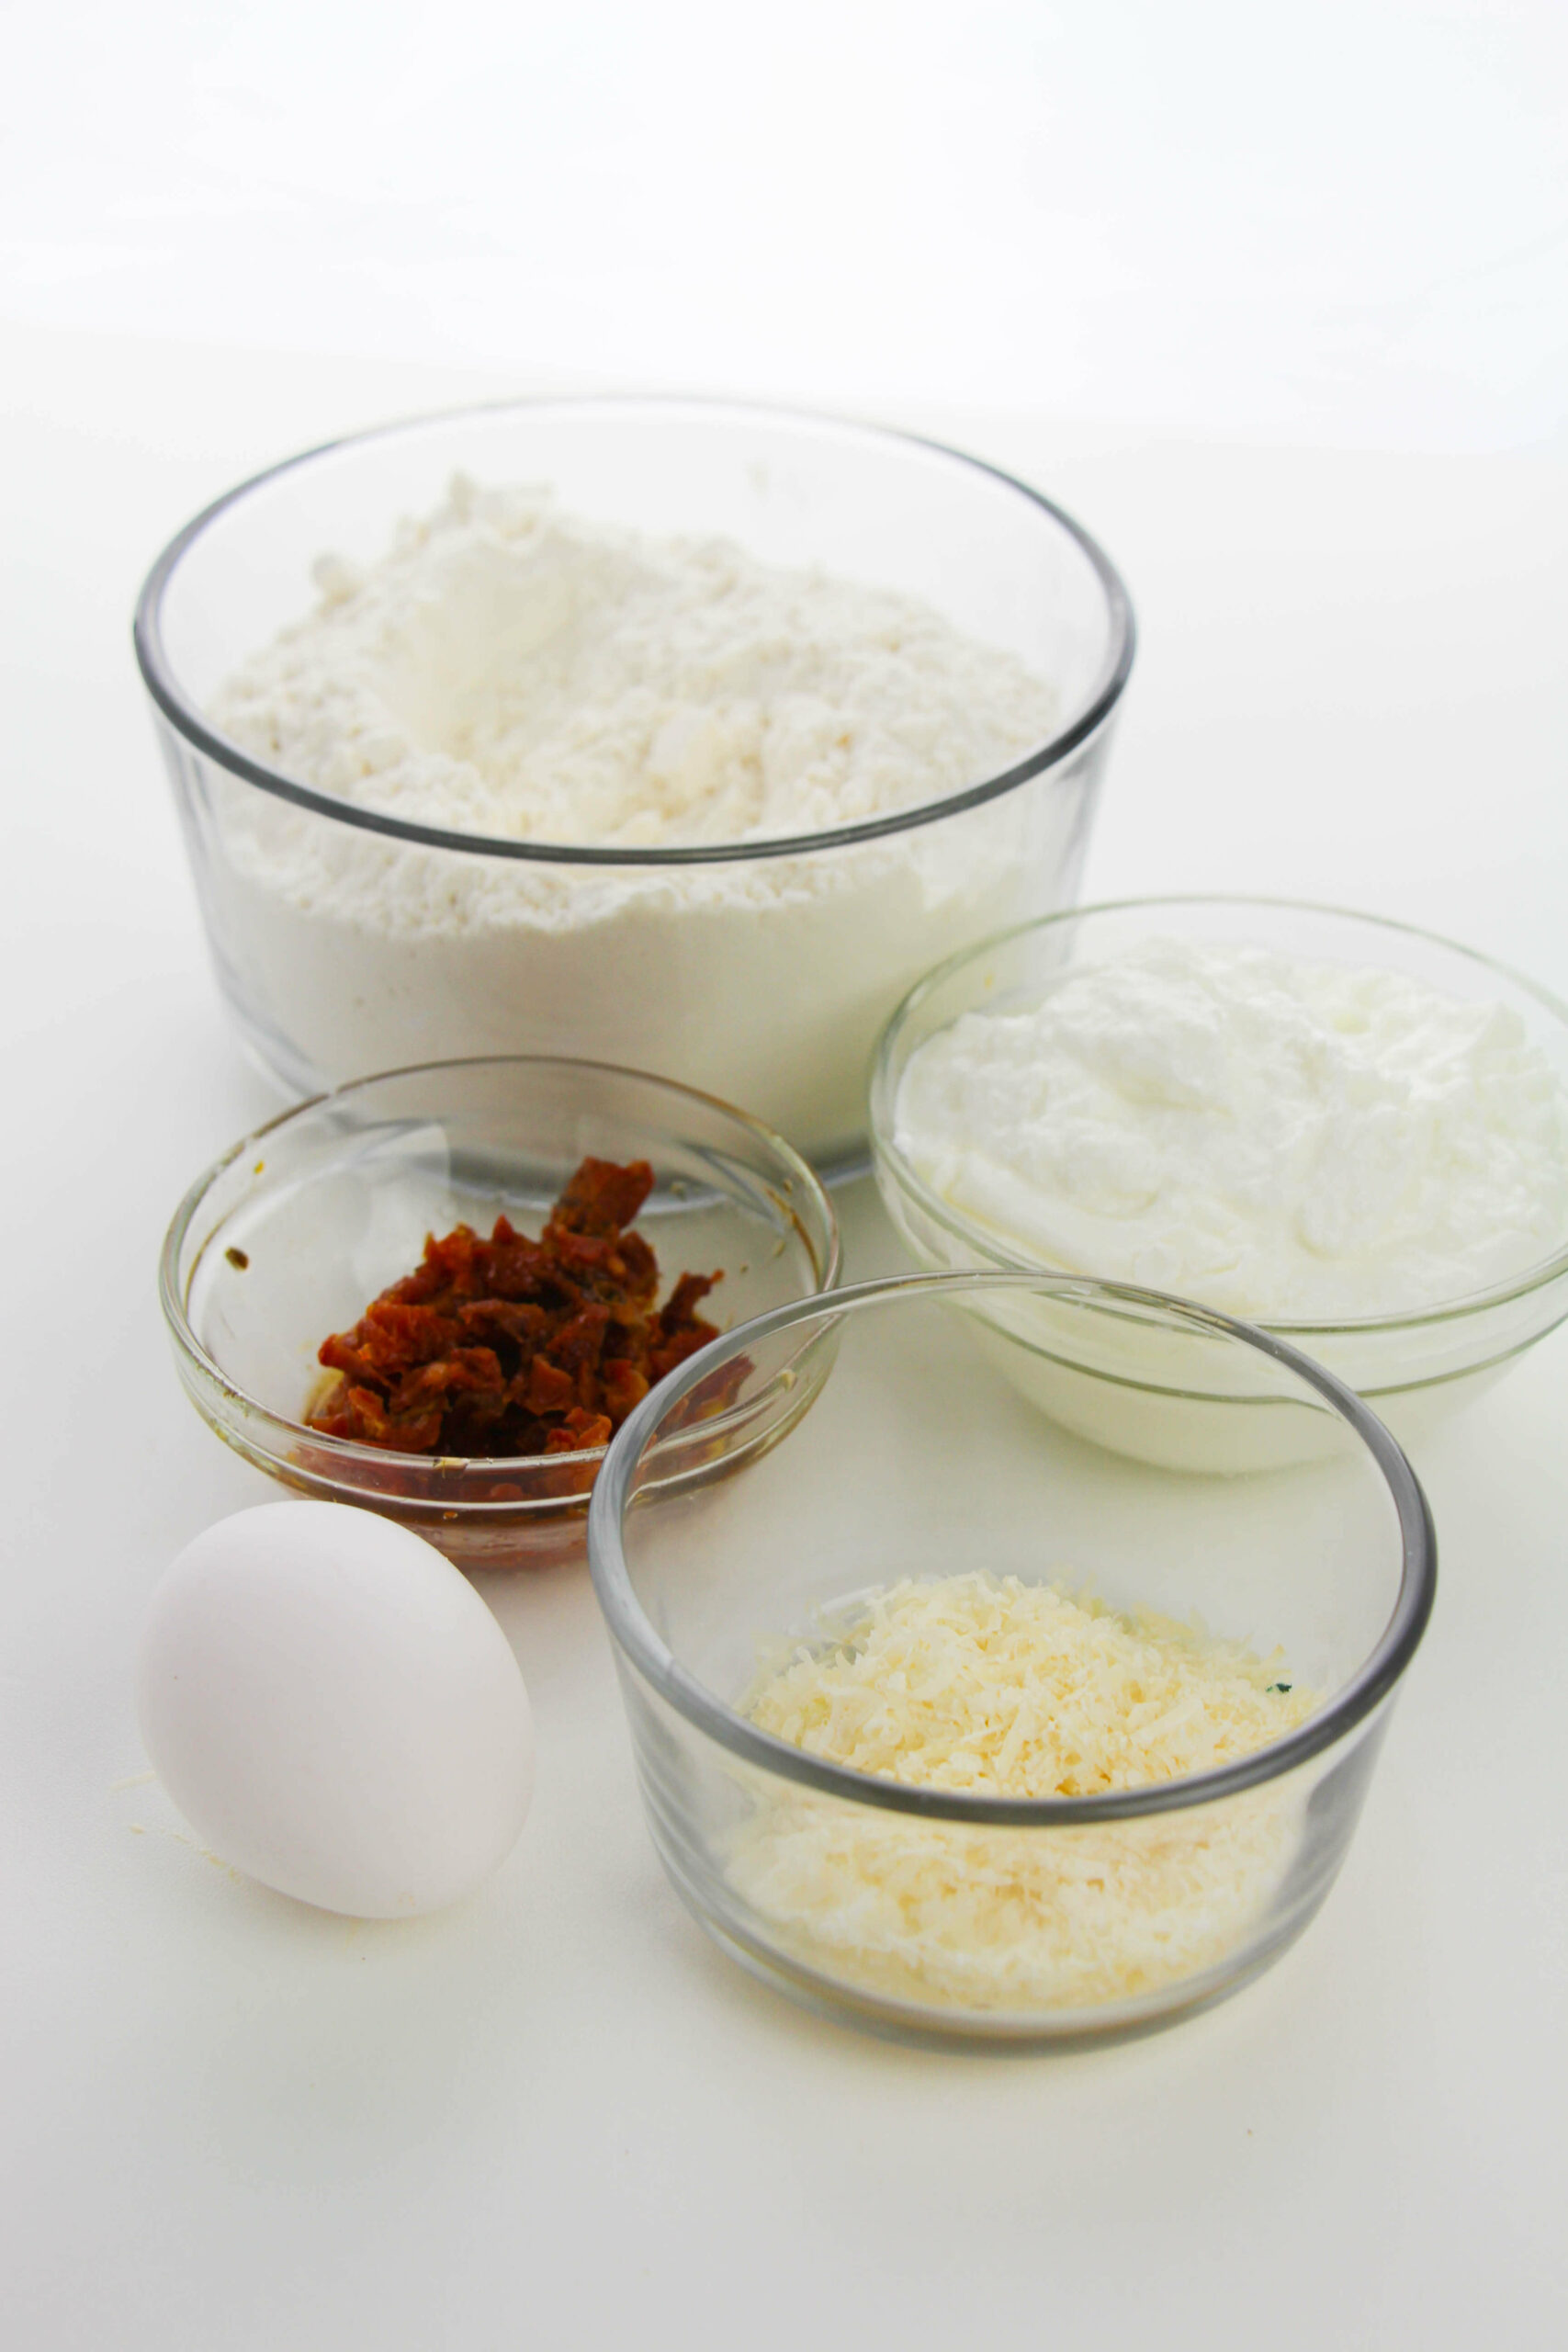 Ingredients for the Asiago cheese bagel such as self-rising flour, sundried tomatoes, eggs and asiago cheese.